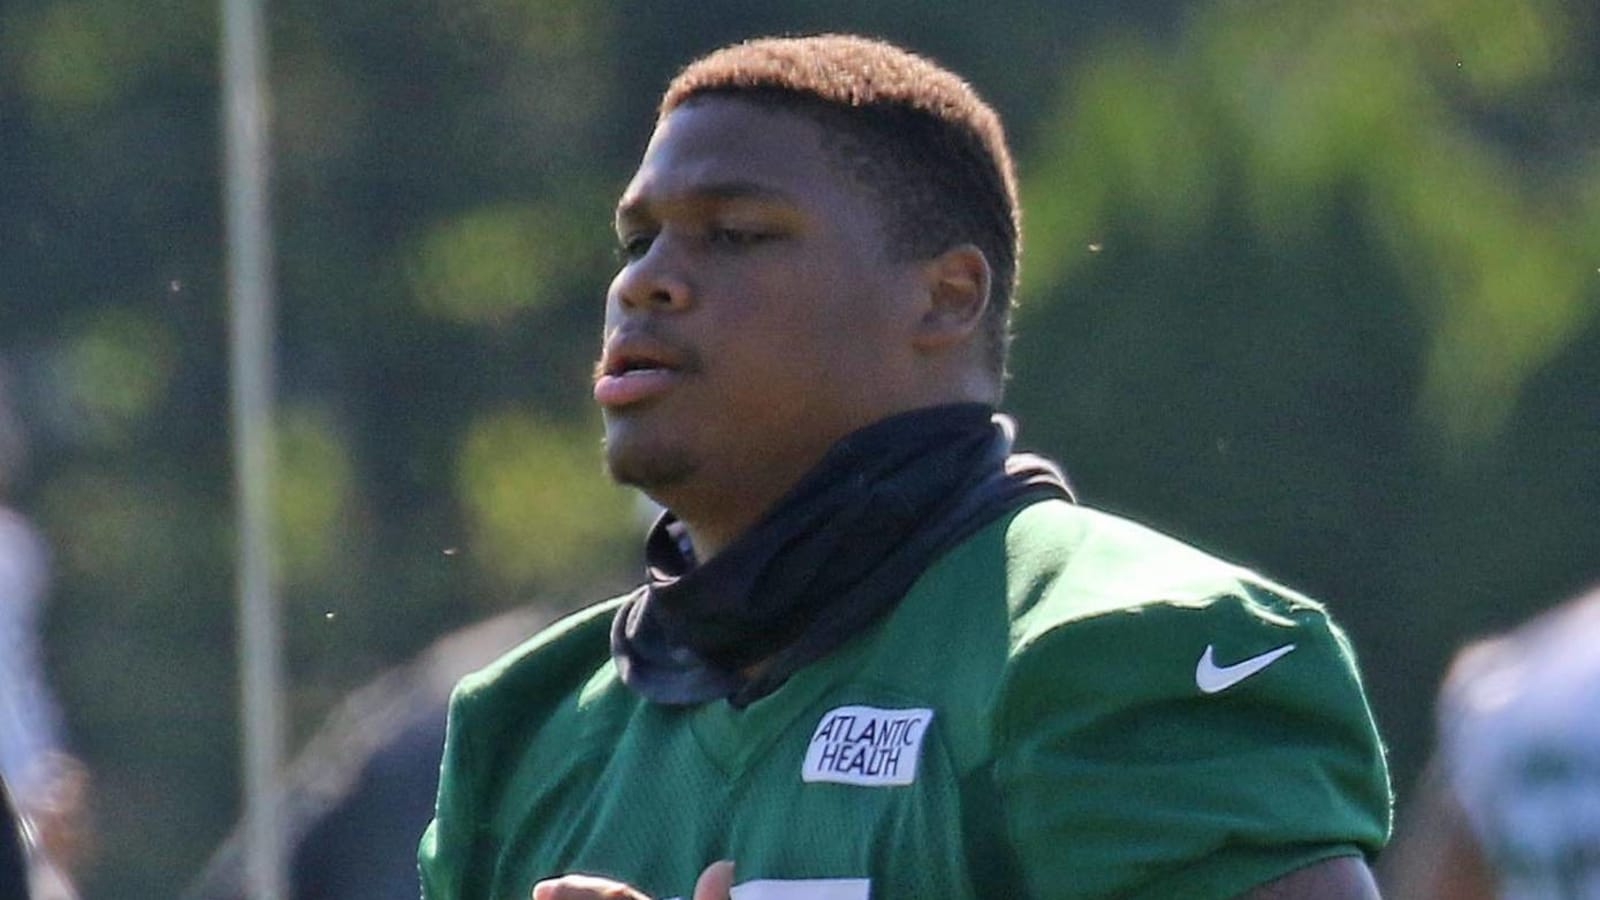 Jets DL Quinnen Williams out 10-12 weeks after foot surgery